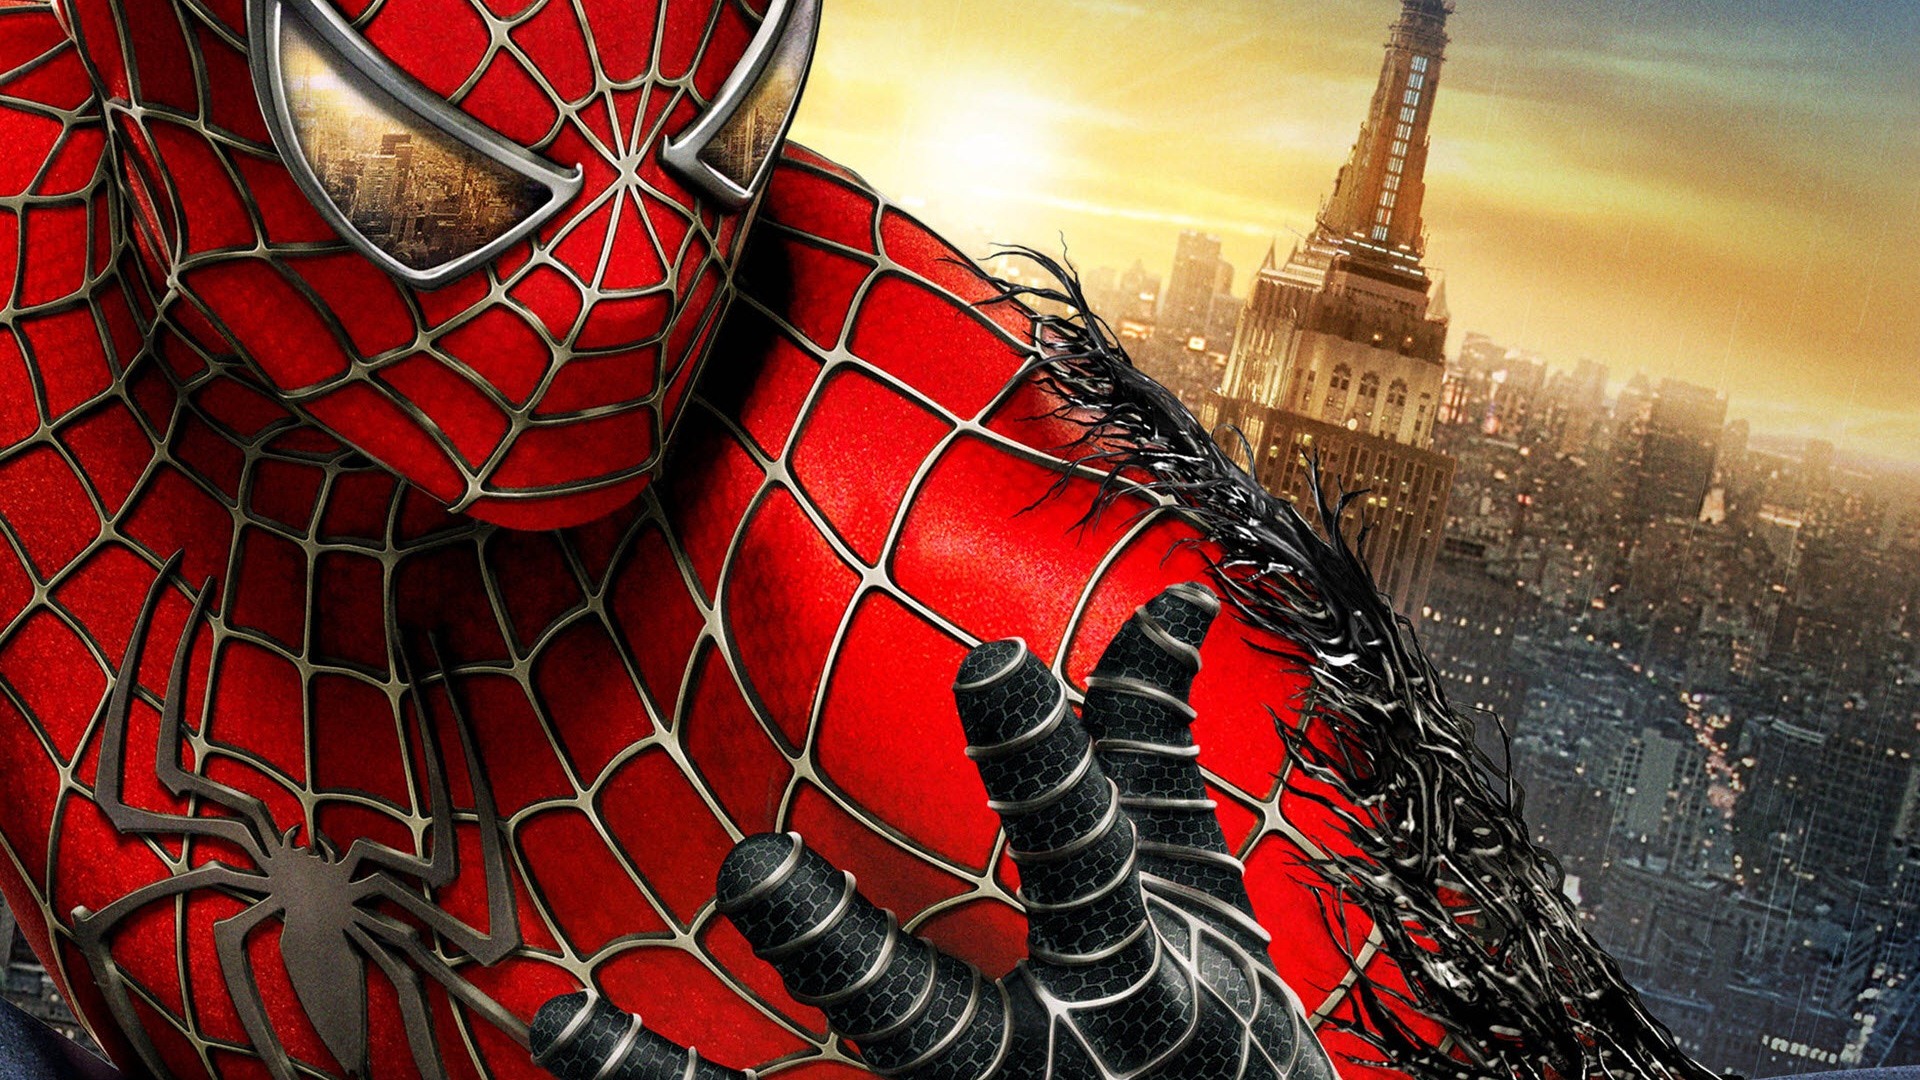 Awesome The Amazing Spiderman HD Wallpaper Free Download